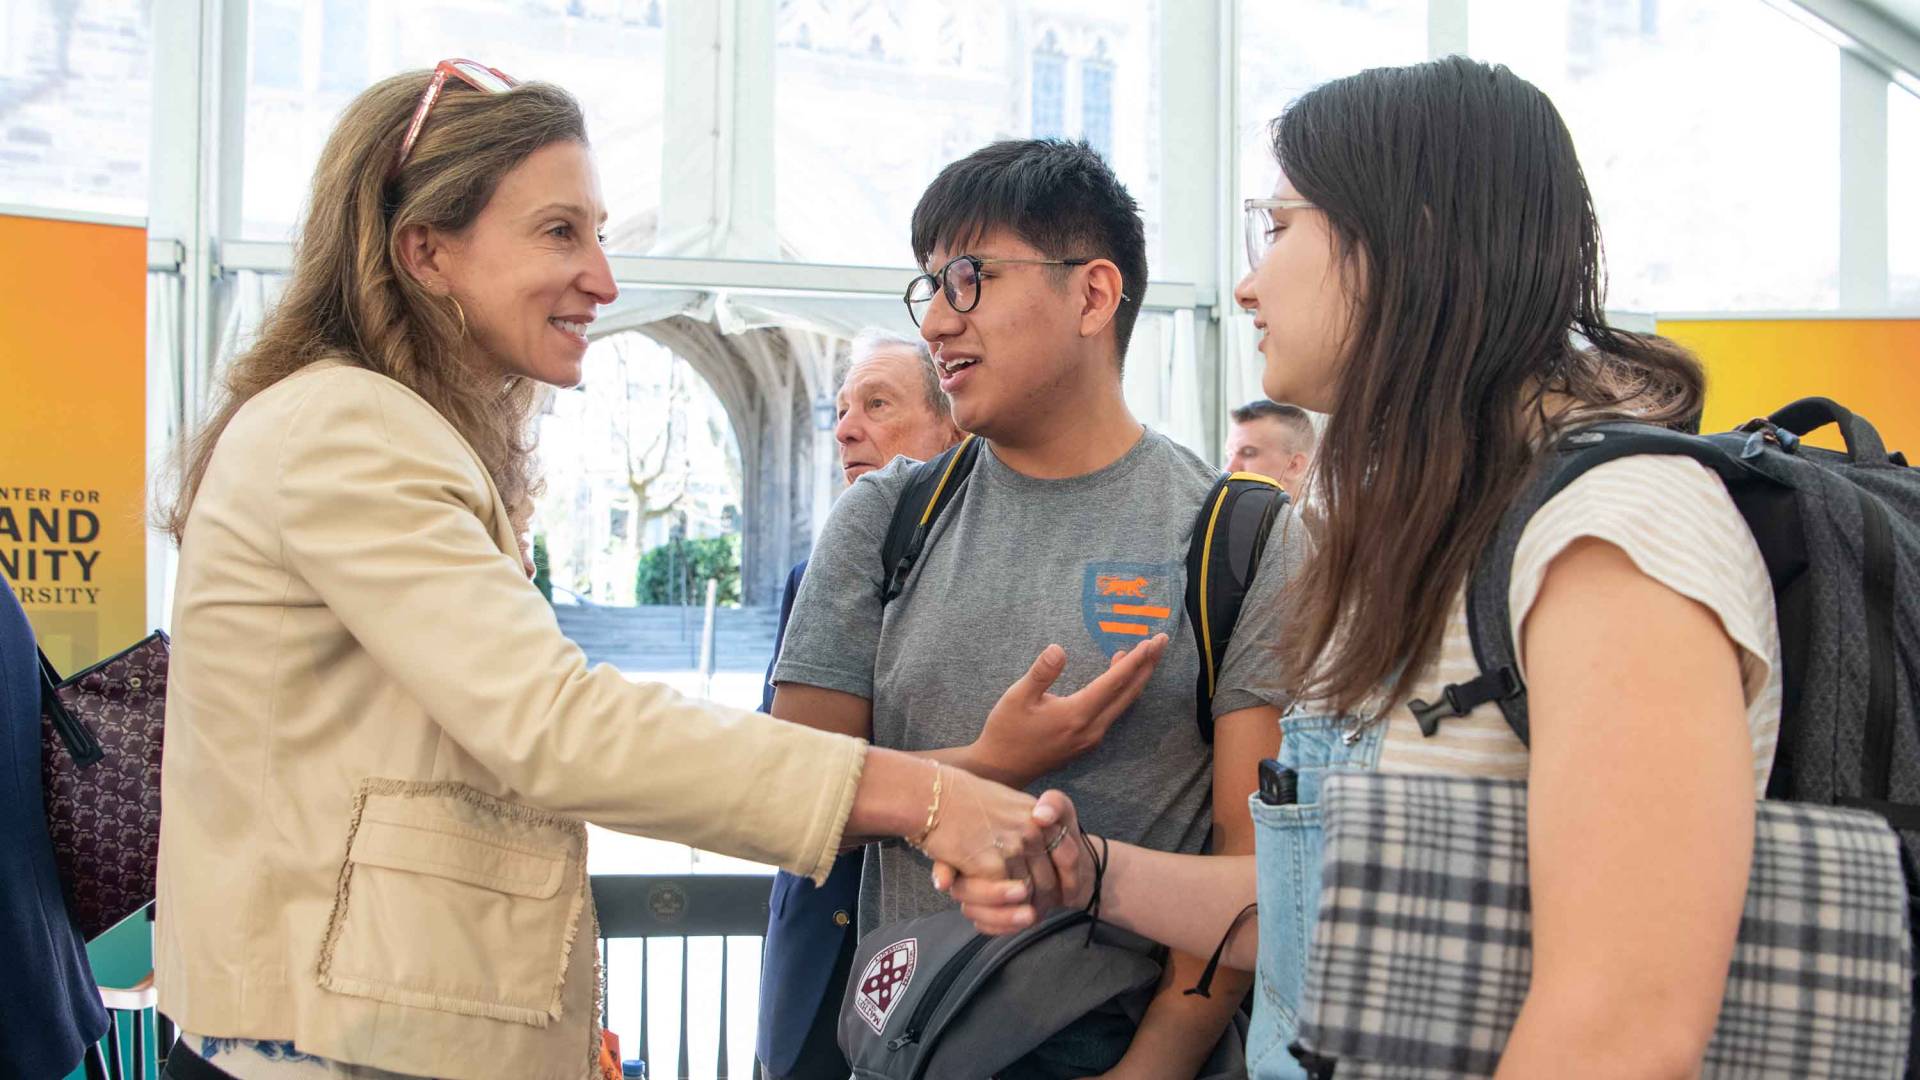 Emma Bloomberg shaking hands with students.